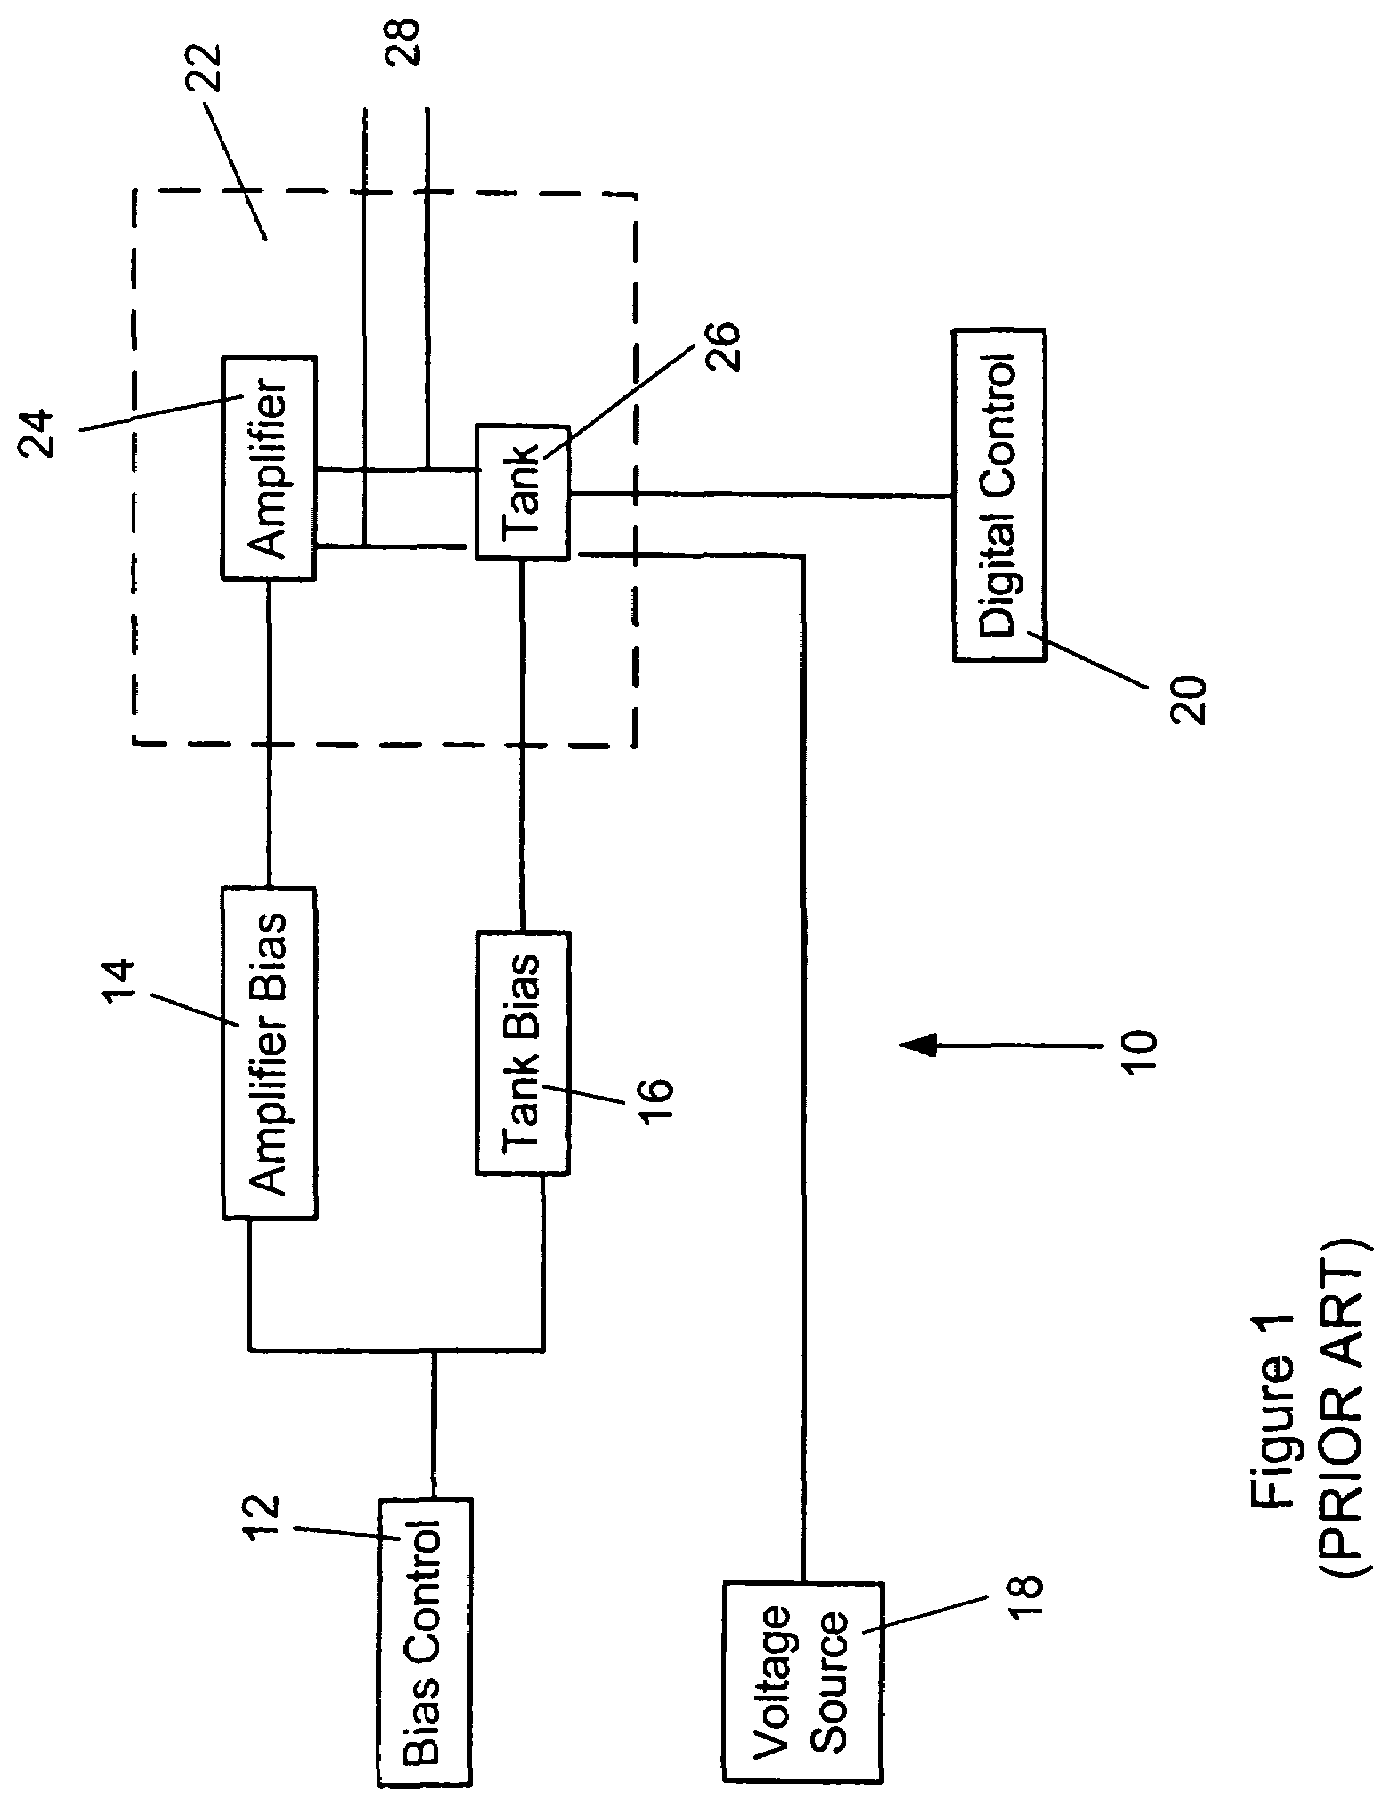 Method and apparatus for reduced noise band switching circuits